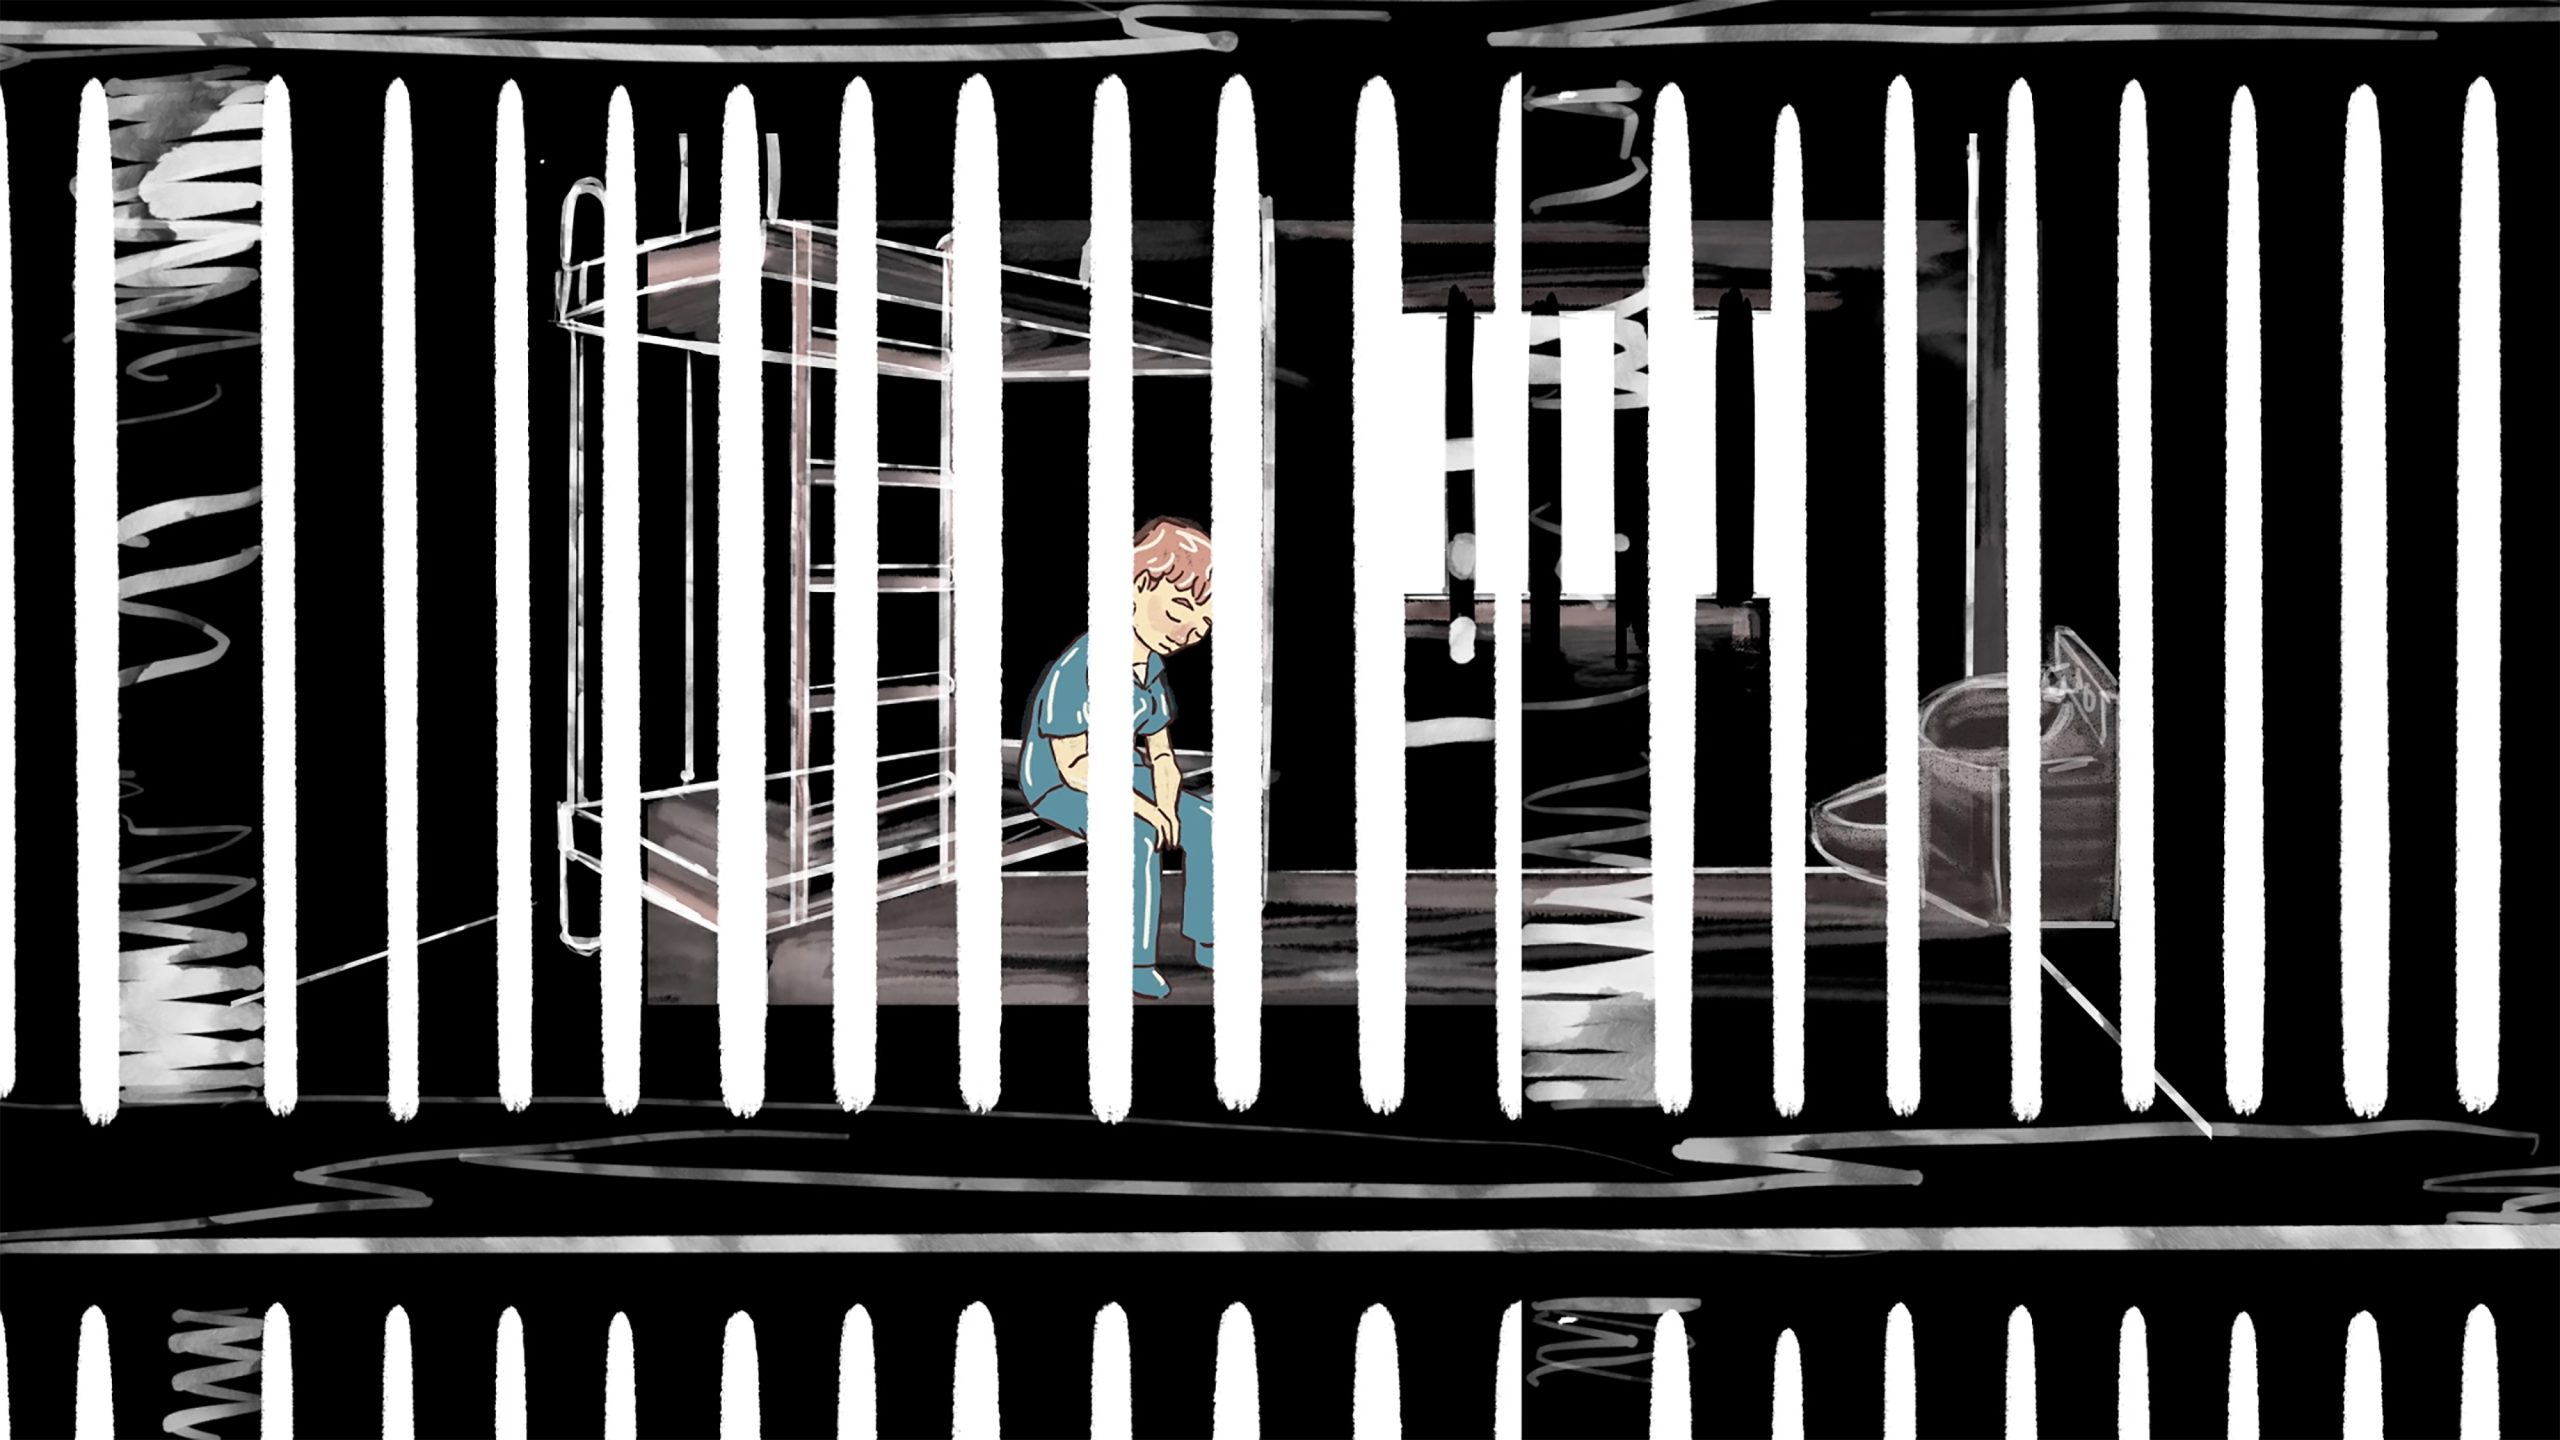 A video of an animated short showing exchanges between women about their experiences of incarceration.